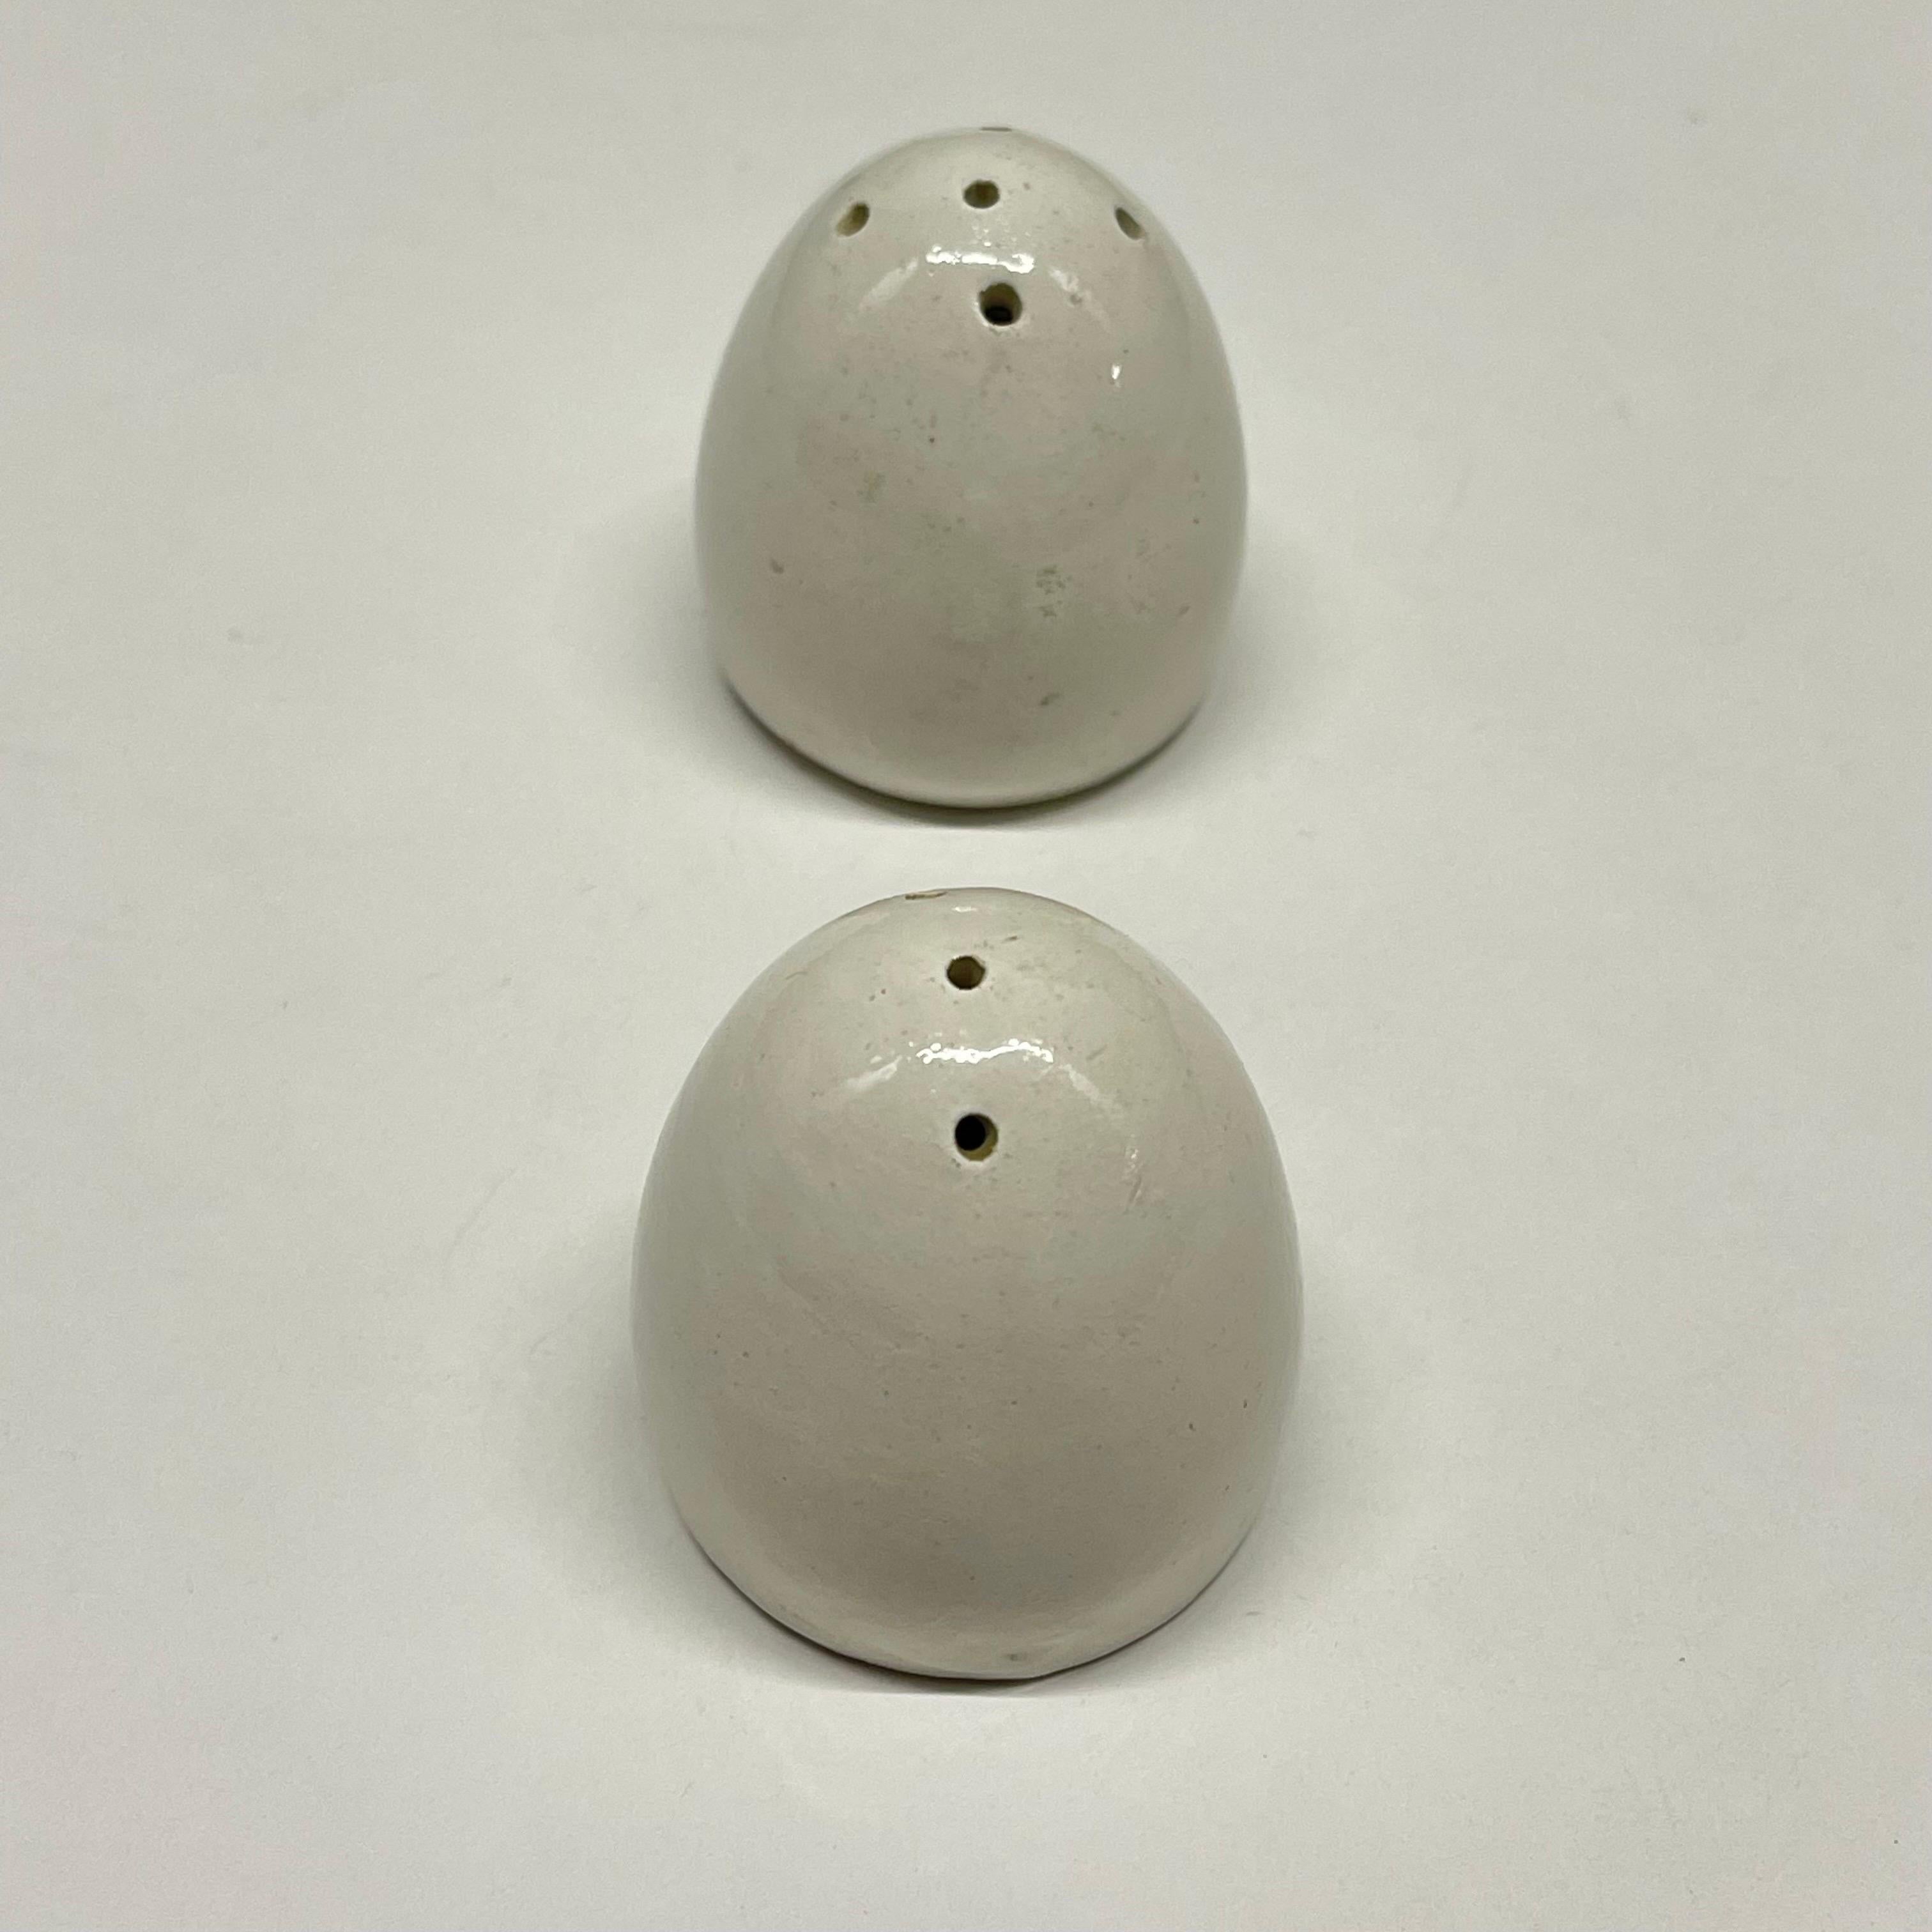 Surrealist pair of Mid-Century Modern Italian salt and pepper shakers in the form of two eggs. Rendered in white glazed ceramic pottery with cork stoppers. Signed and made in Italy, circa 1960s.